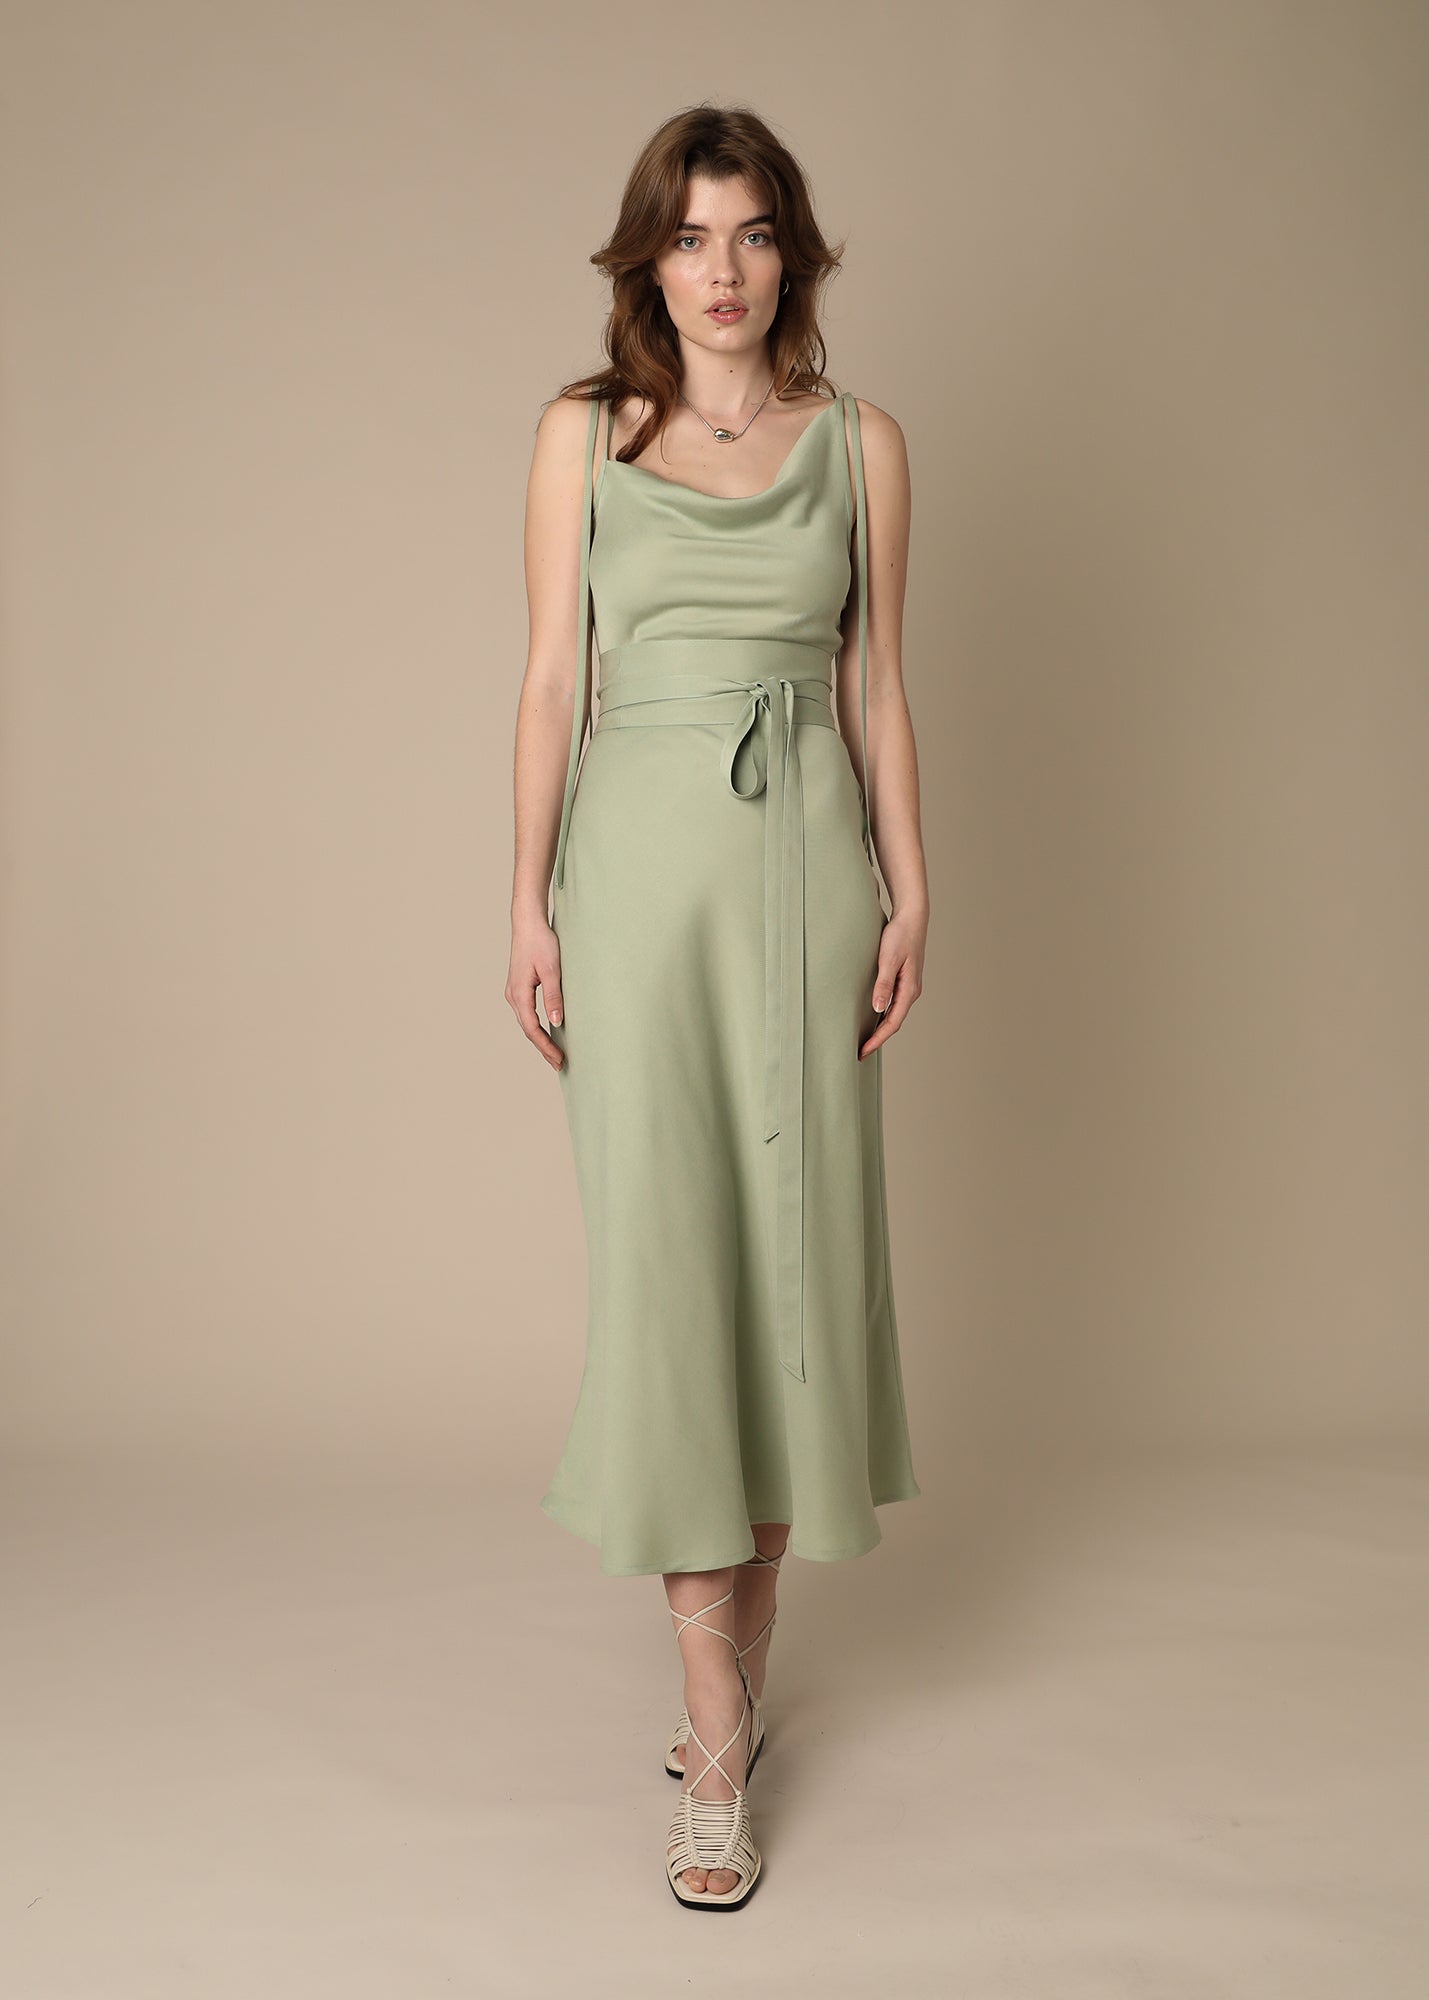 THE LUCIE DRESS - sage green